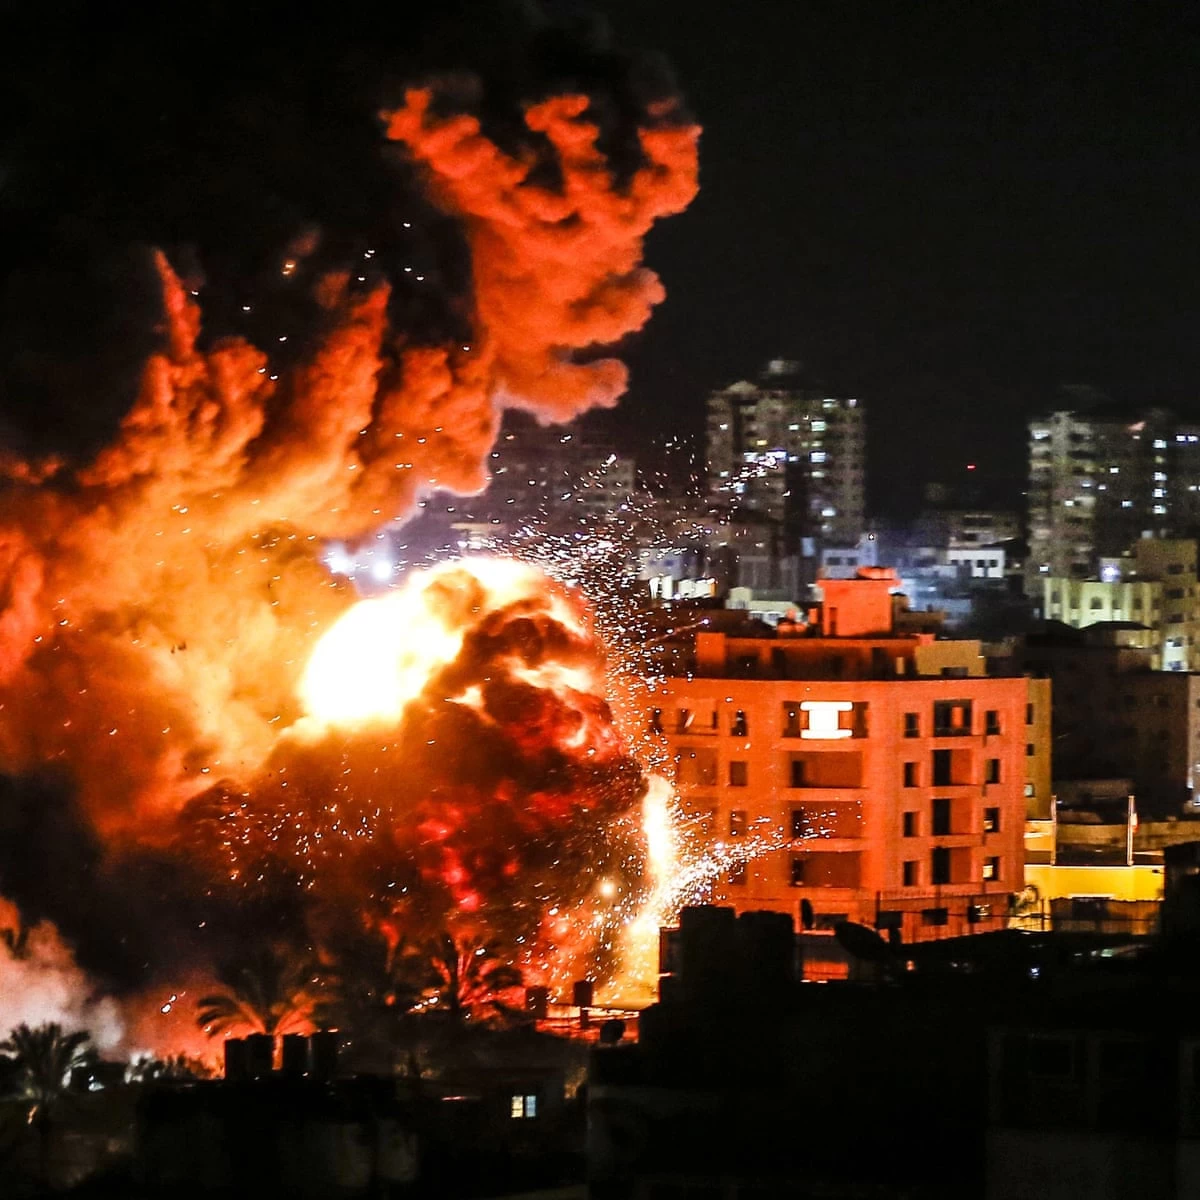 Death toll reaches 36 as Israeli military continues its bombardment of besieged Gaza Strip